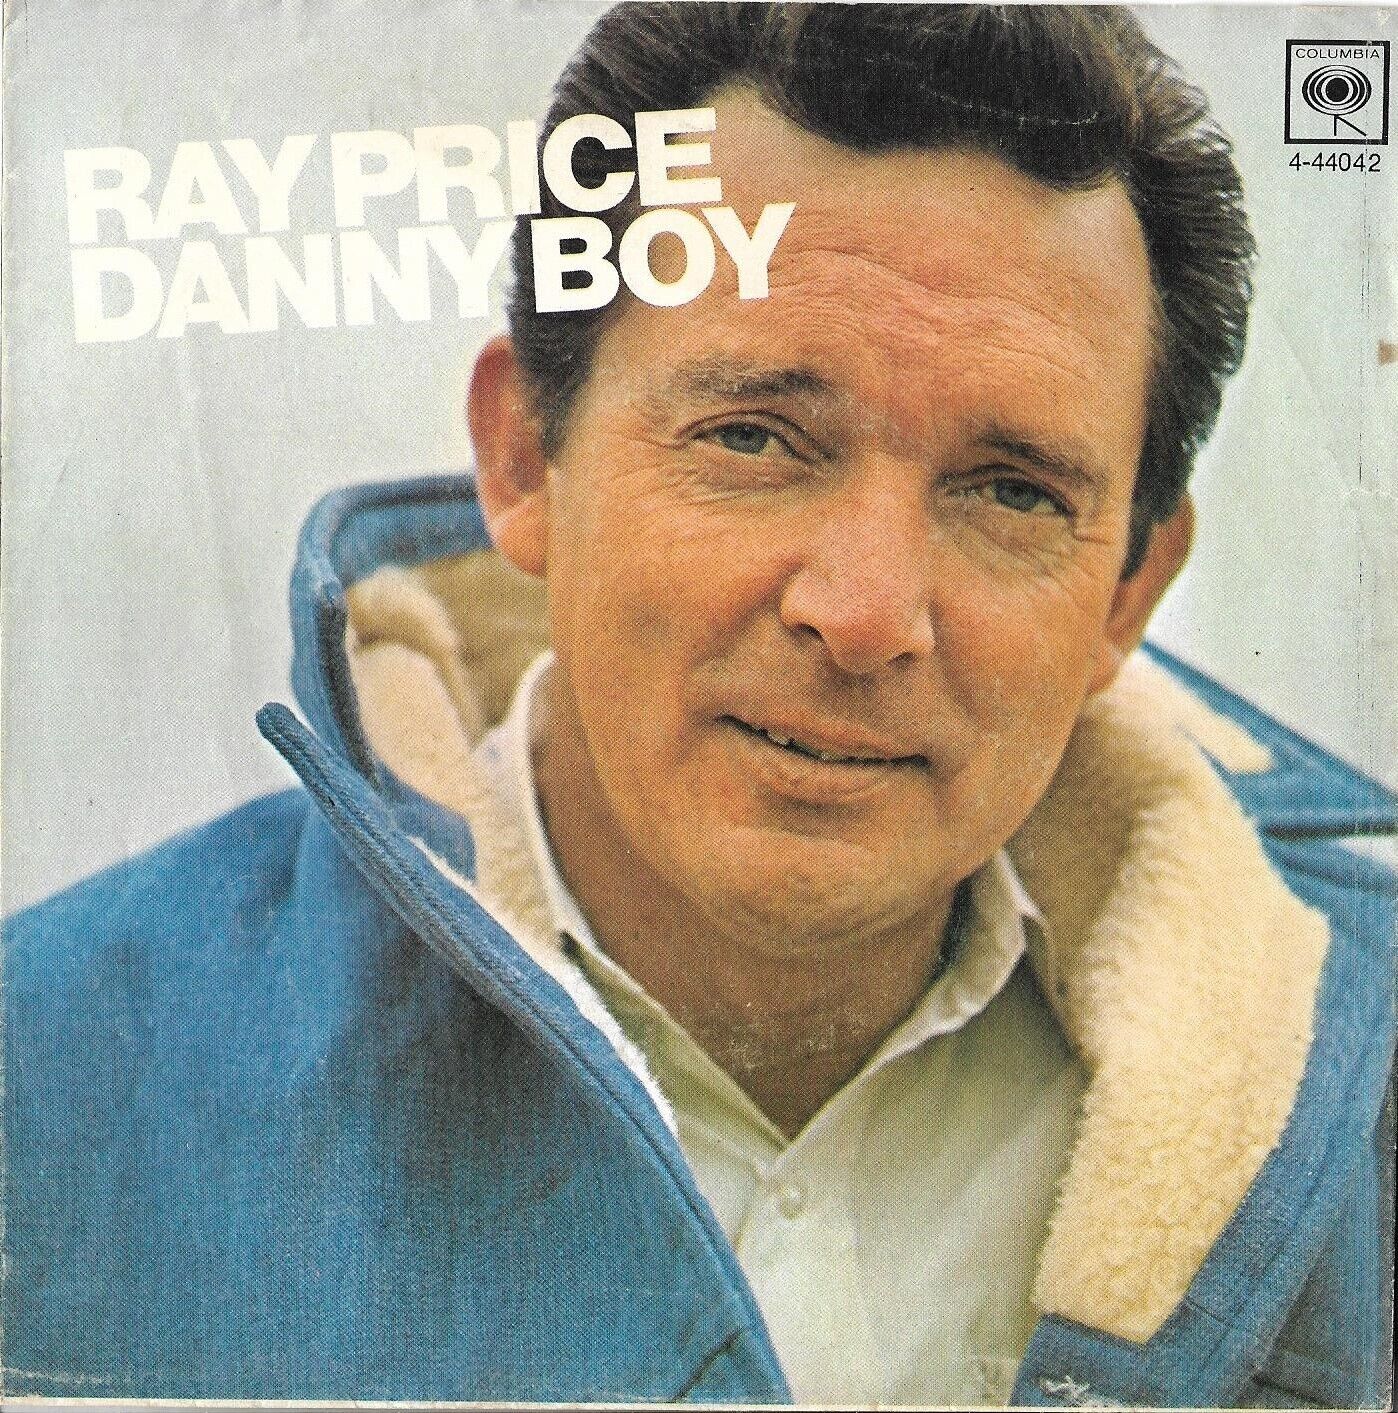 Picture Sleeve ONLY: Ray Price: "Danny Boy" - from his '67 hit - Excellent!